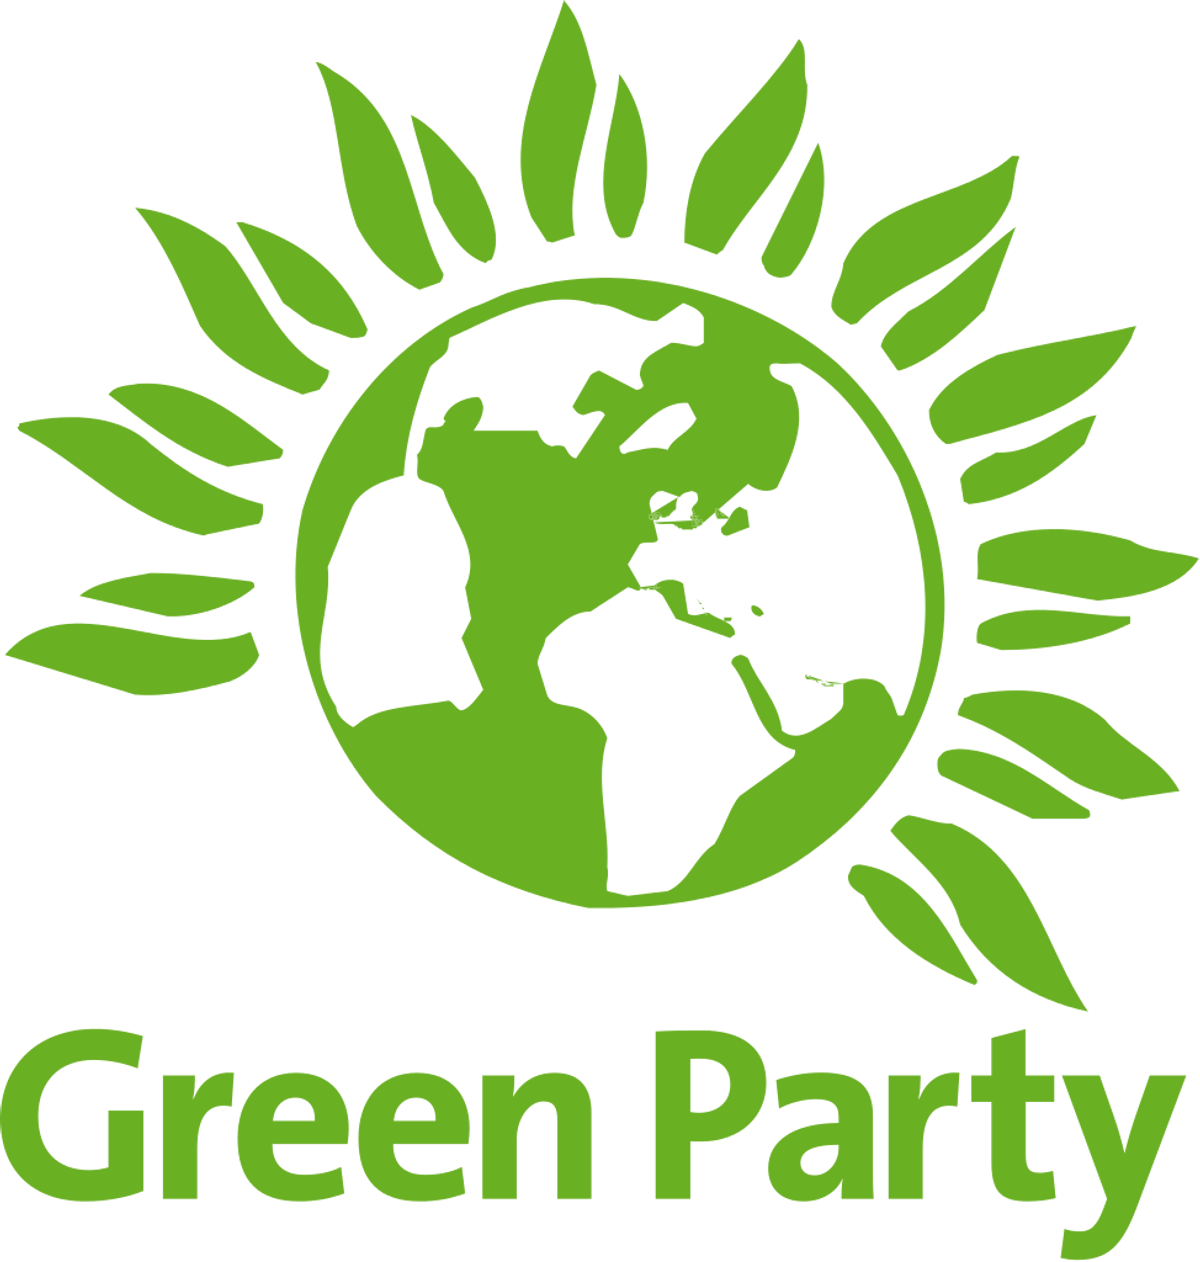 The Case Against the Green Party